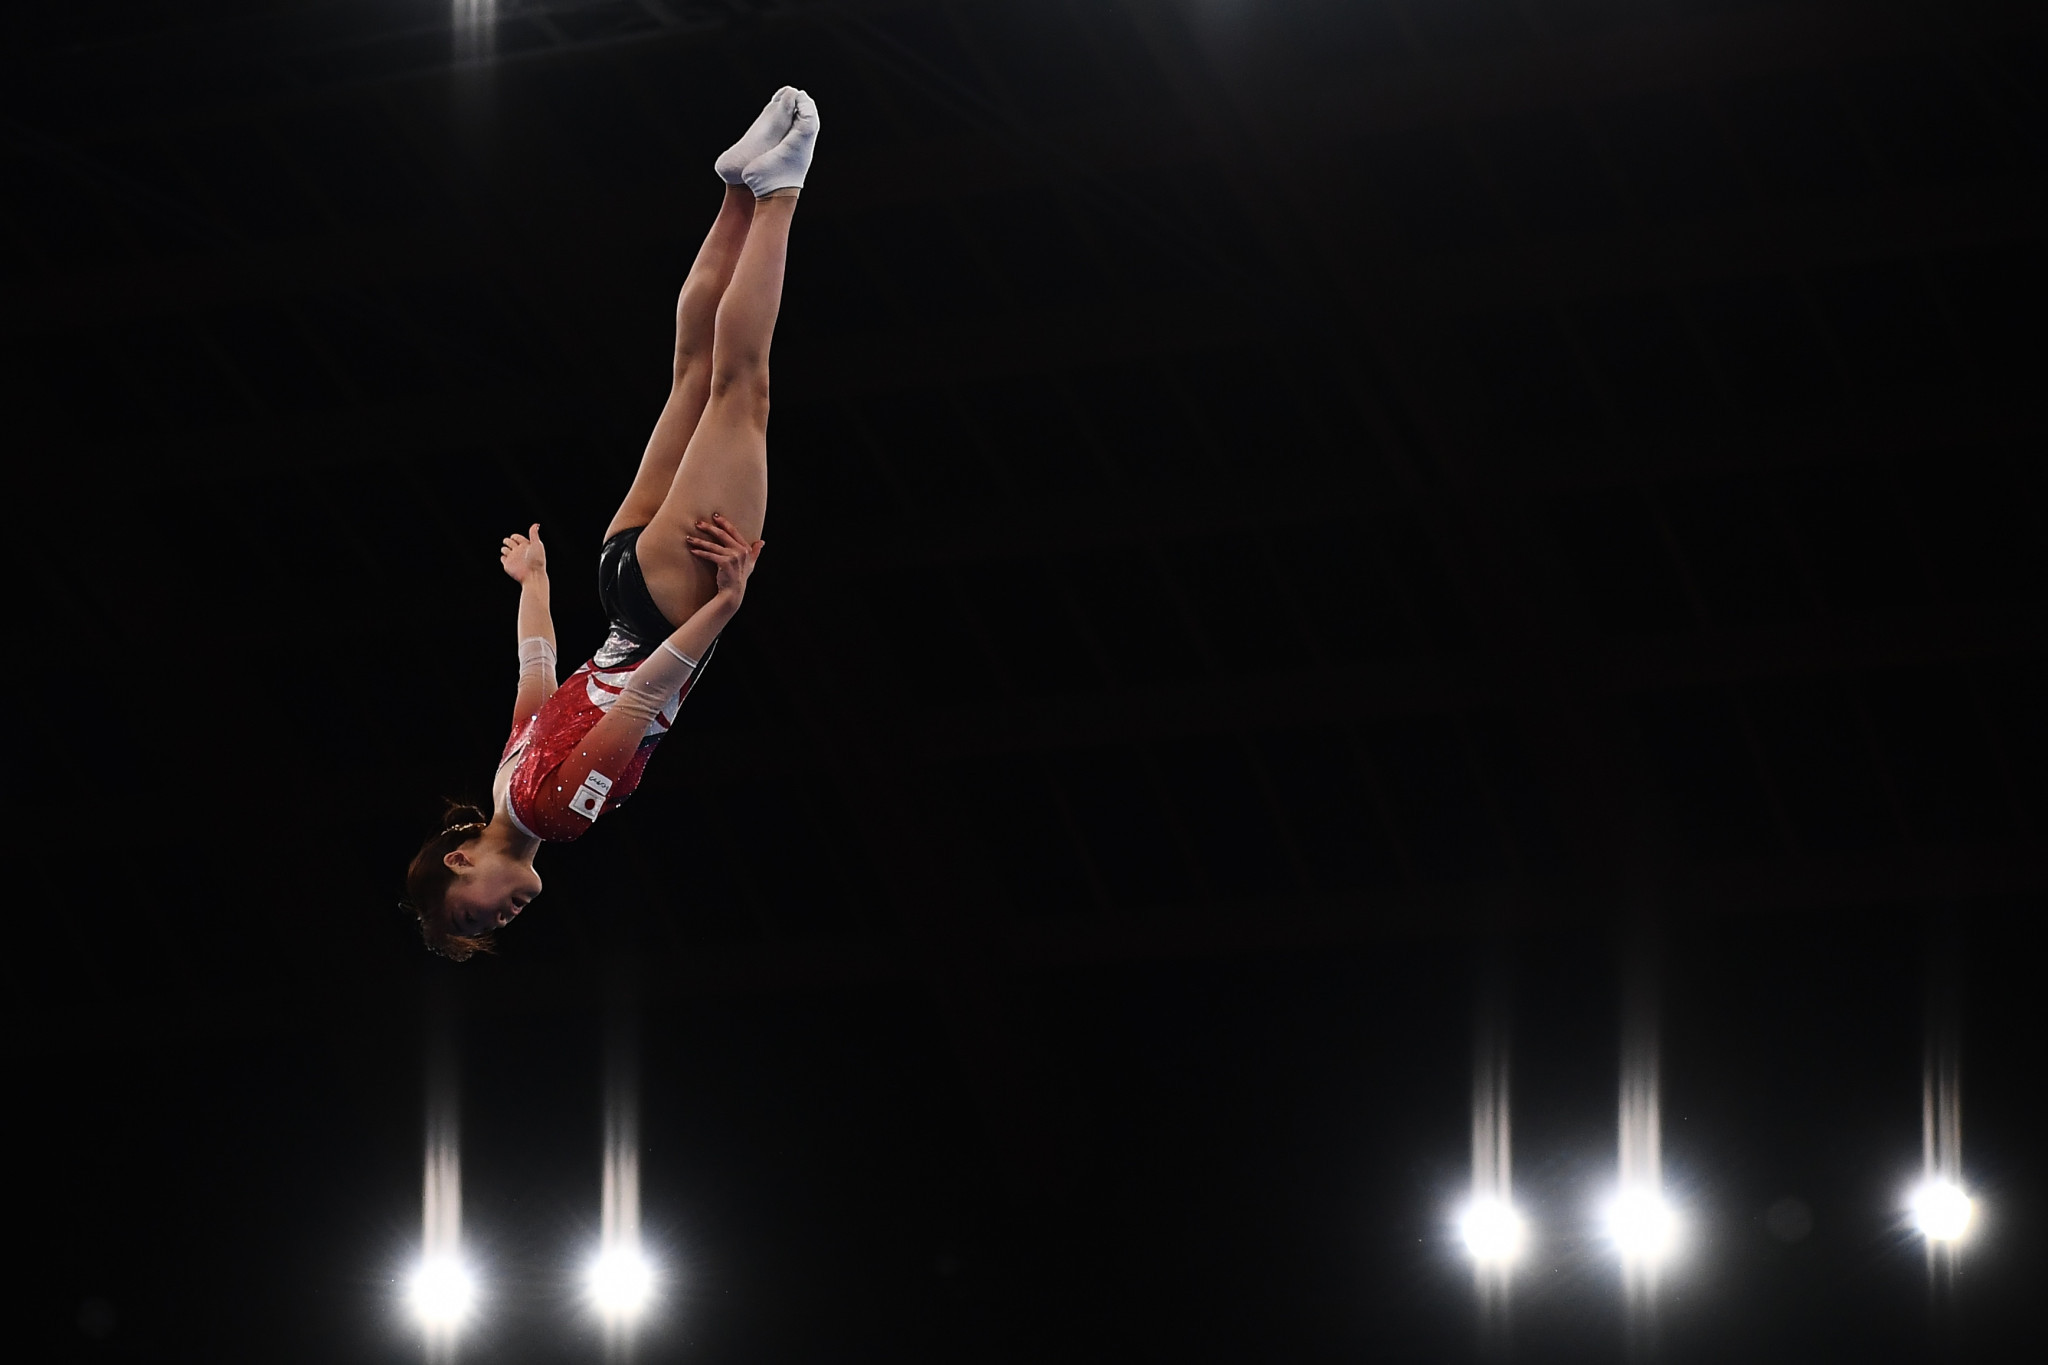 Trampoline Gymnastics World Championships pushed back to avoid FIG Congress clash